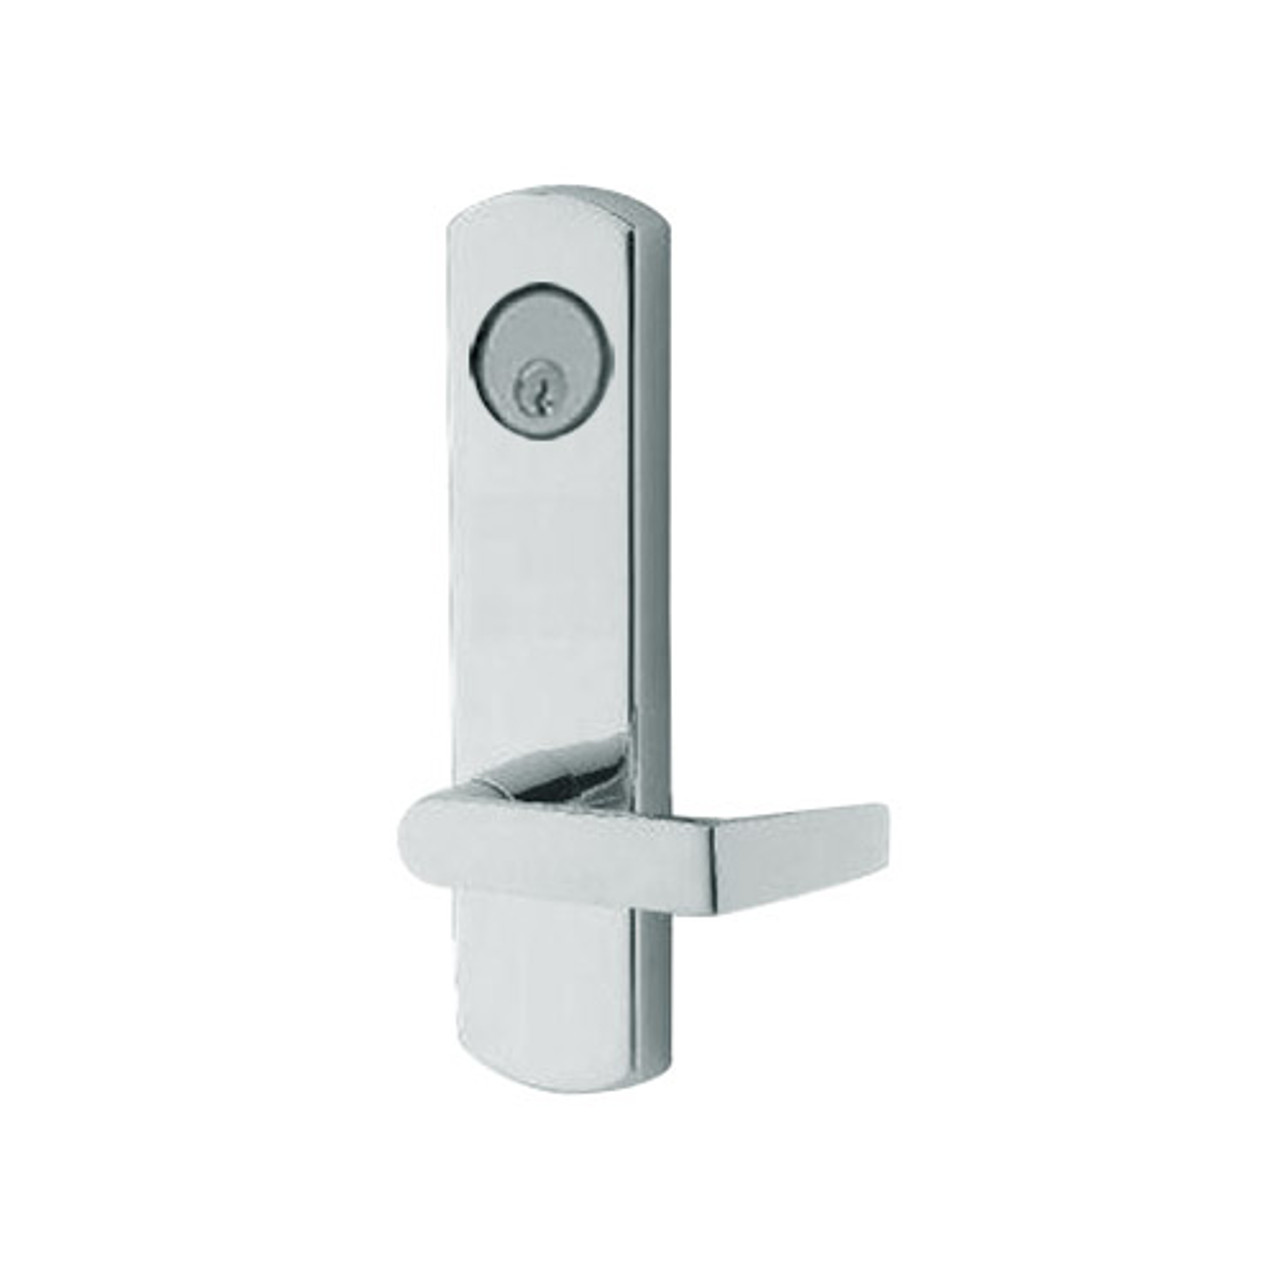 3080E-03-0-96-50 US32 Adams Rite Electrified Entry Trim with Square Lever in Bright Stainless Finish